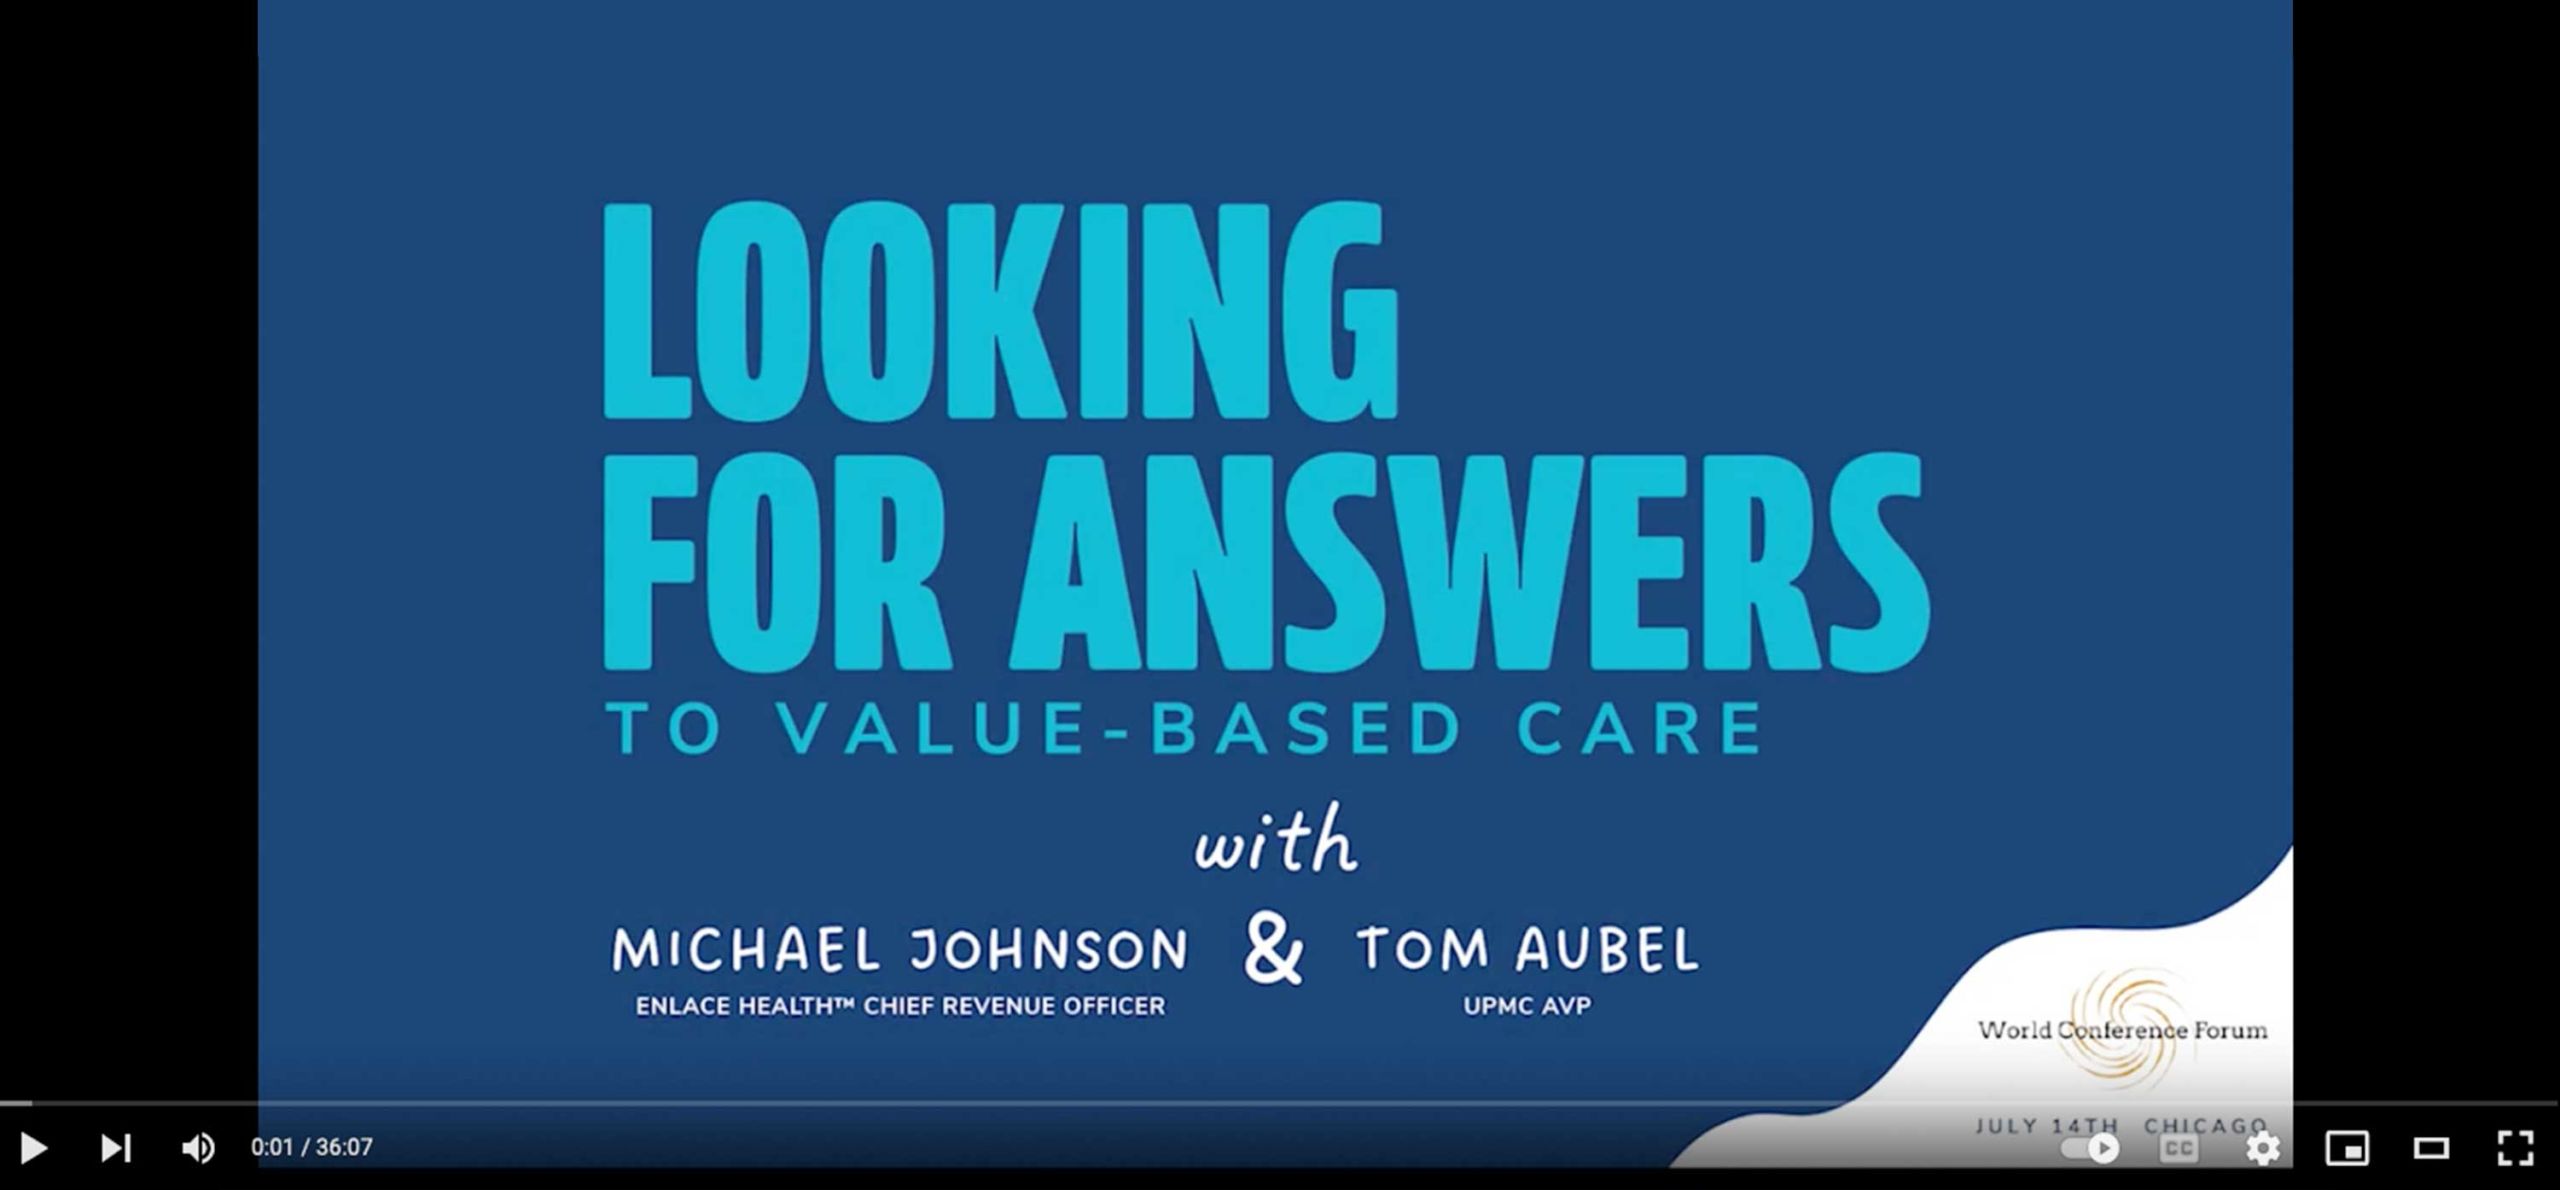 Looking for Answers to Value-Based Care